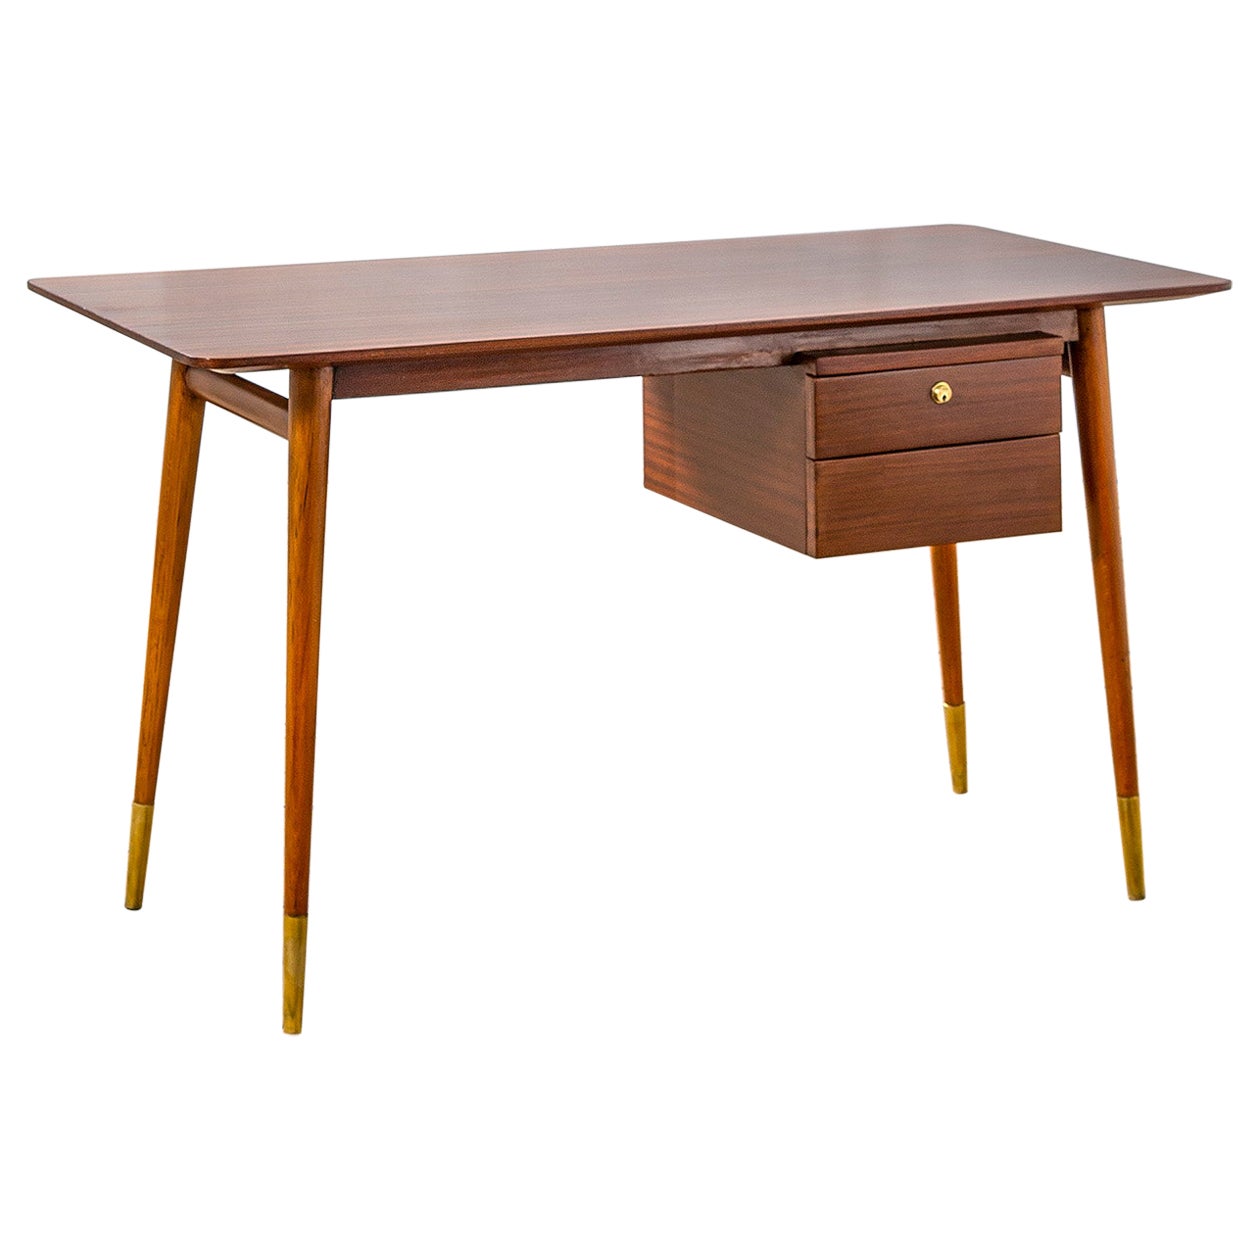 20th Century Melchiorre Bega Desk with wooden structure, drawers Brass details